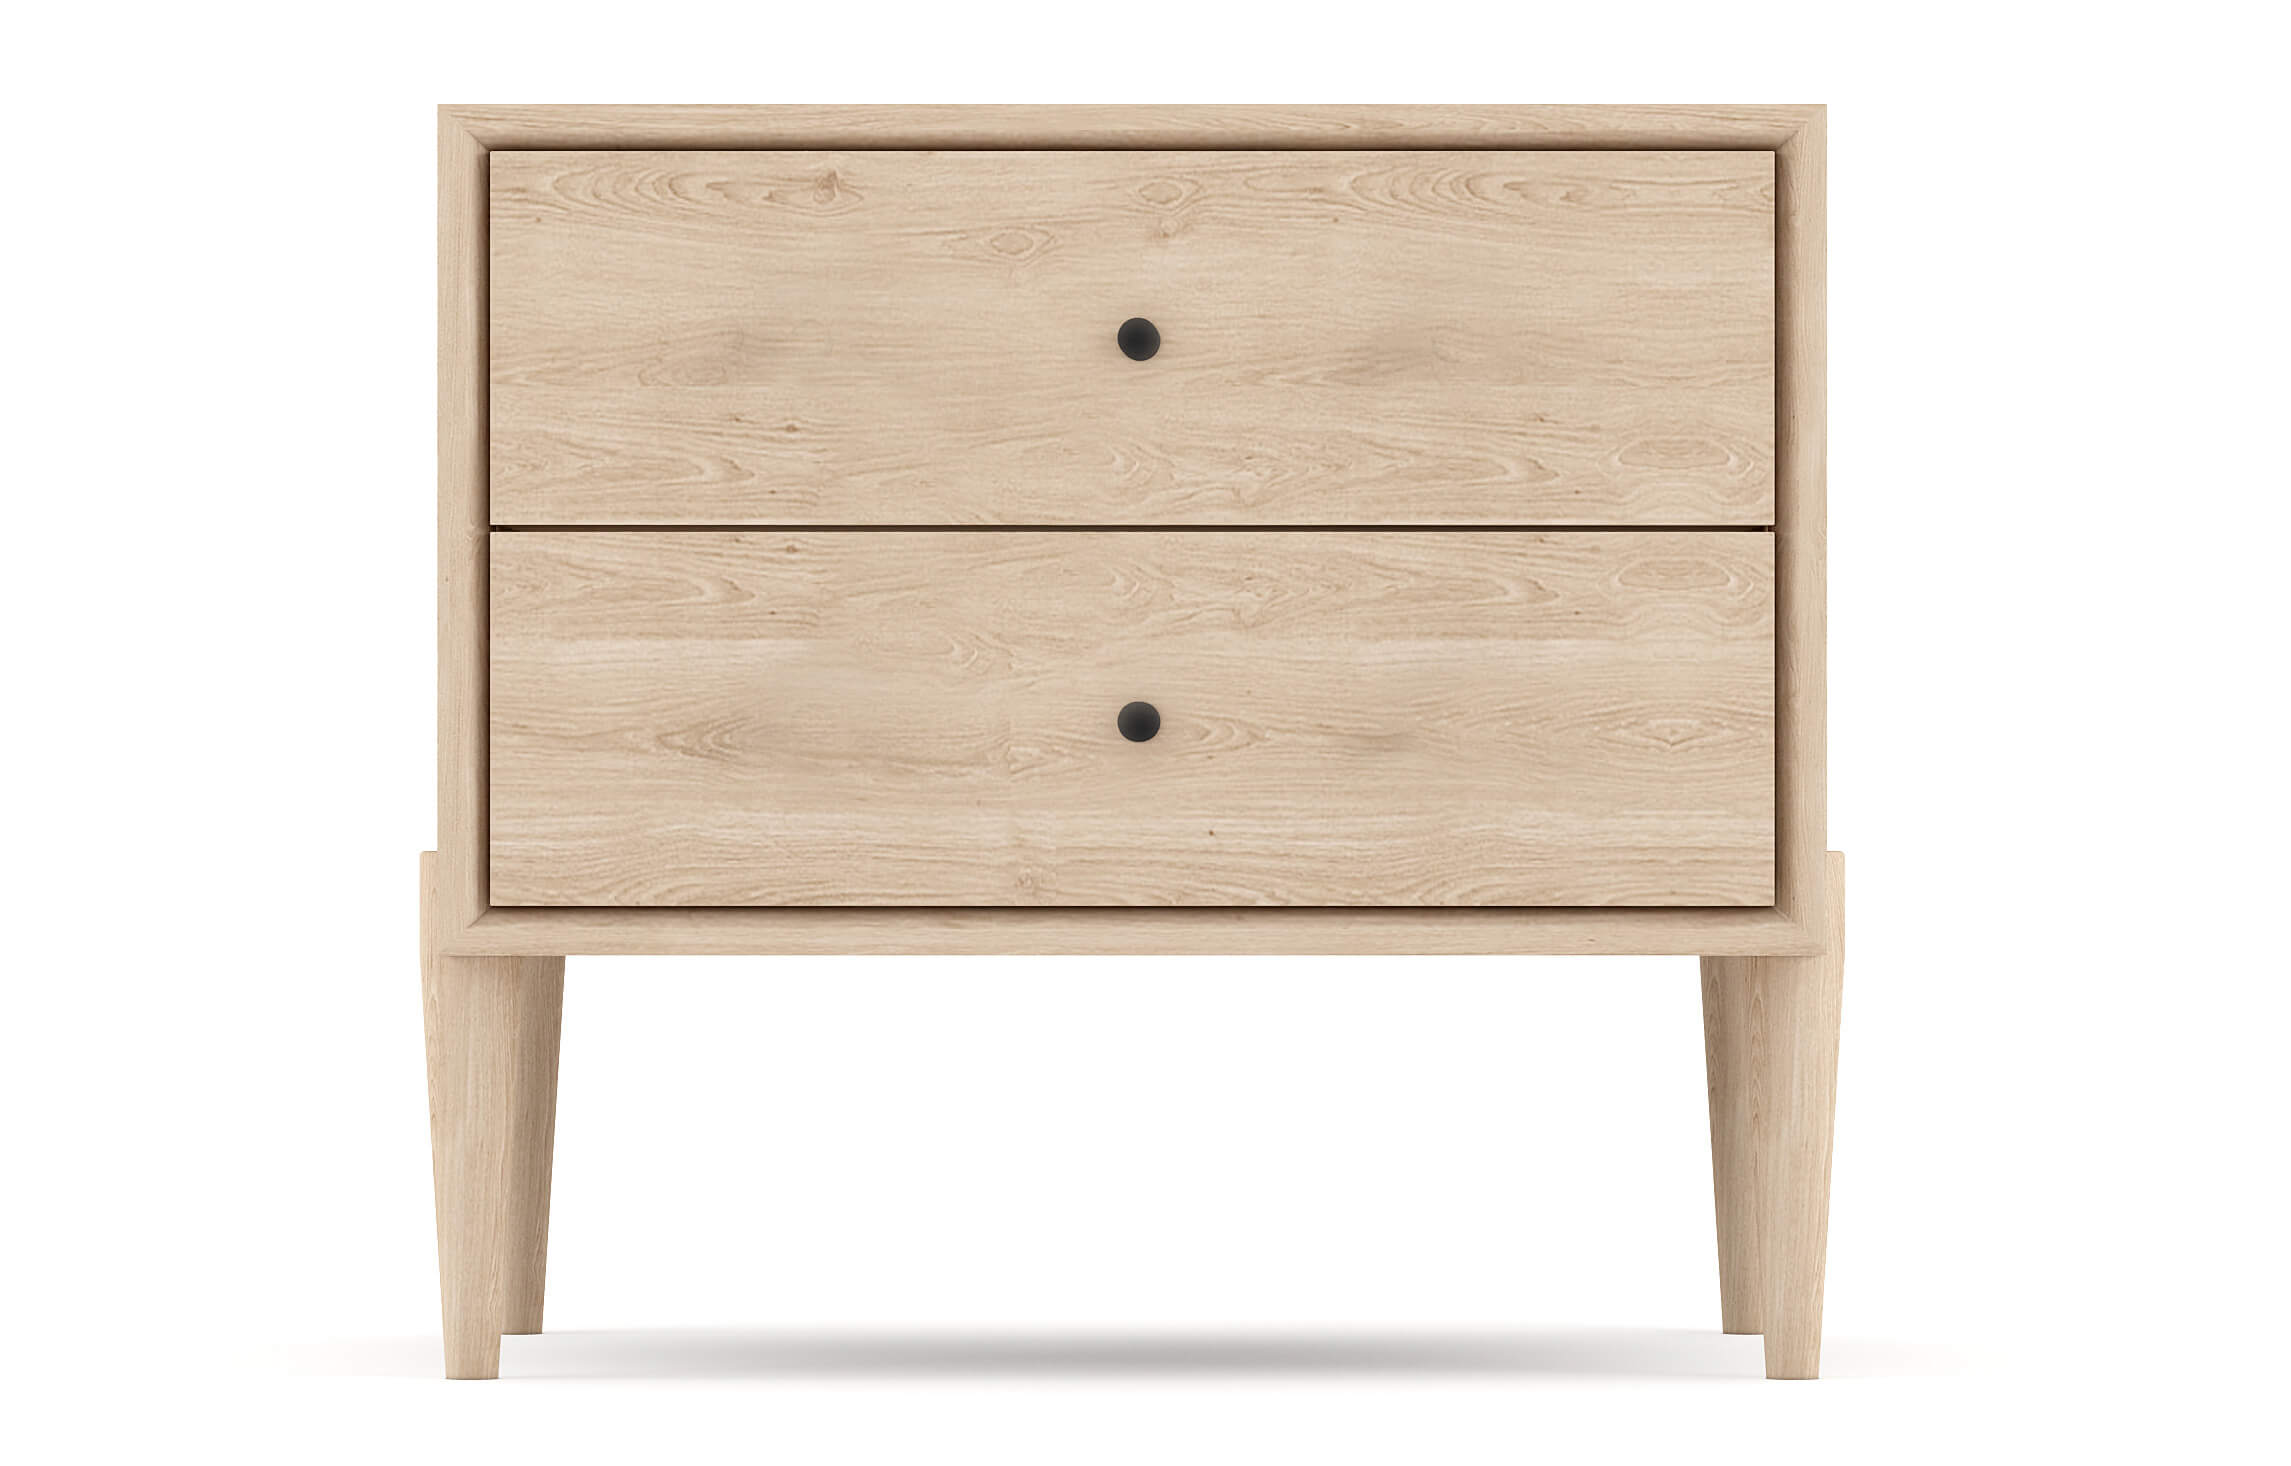 Shown in maple with knobs